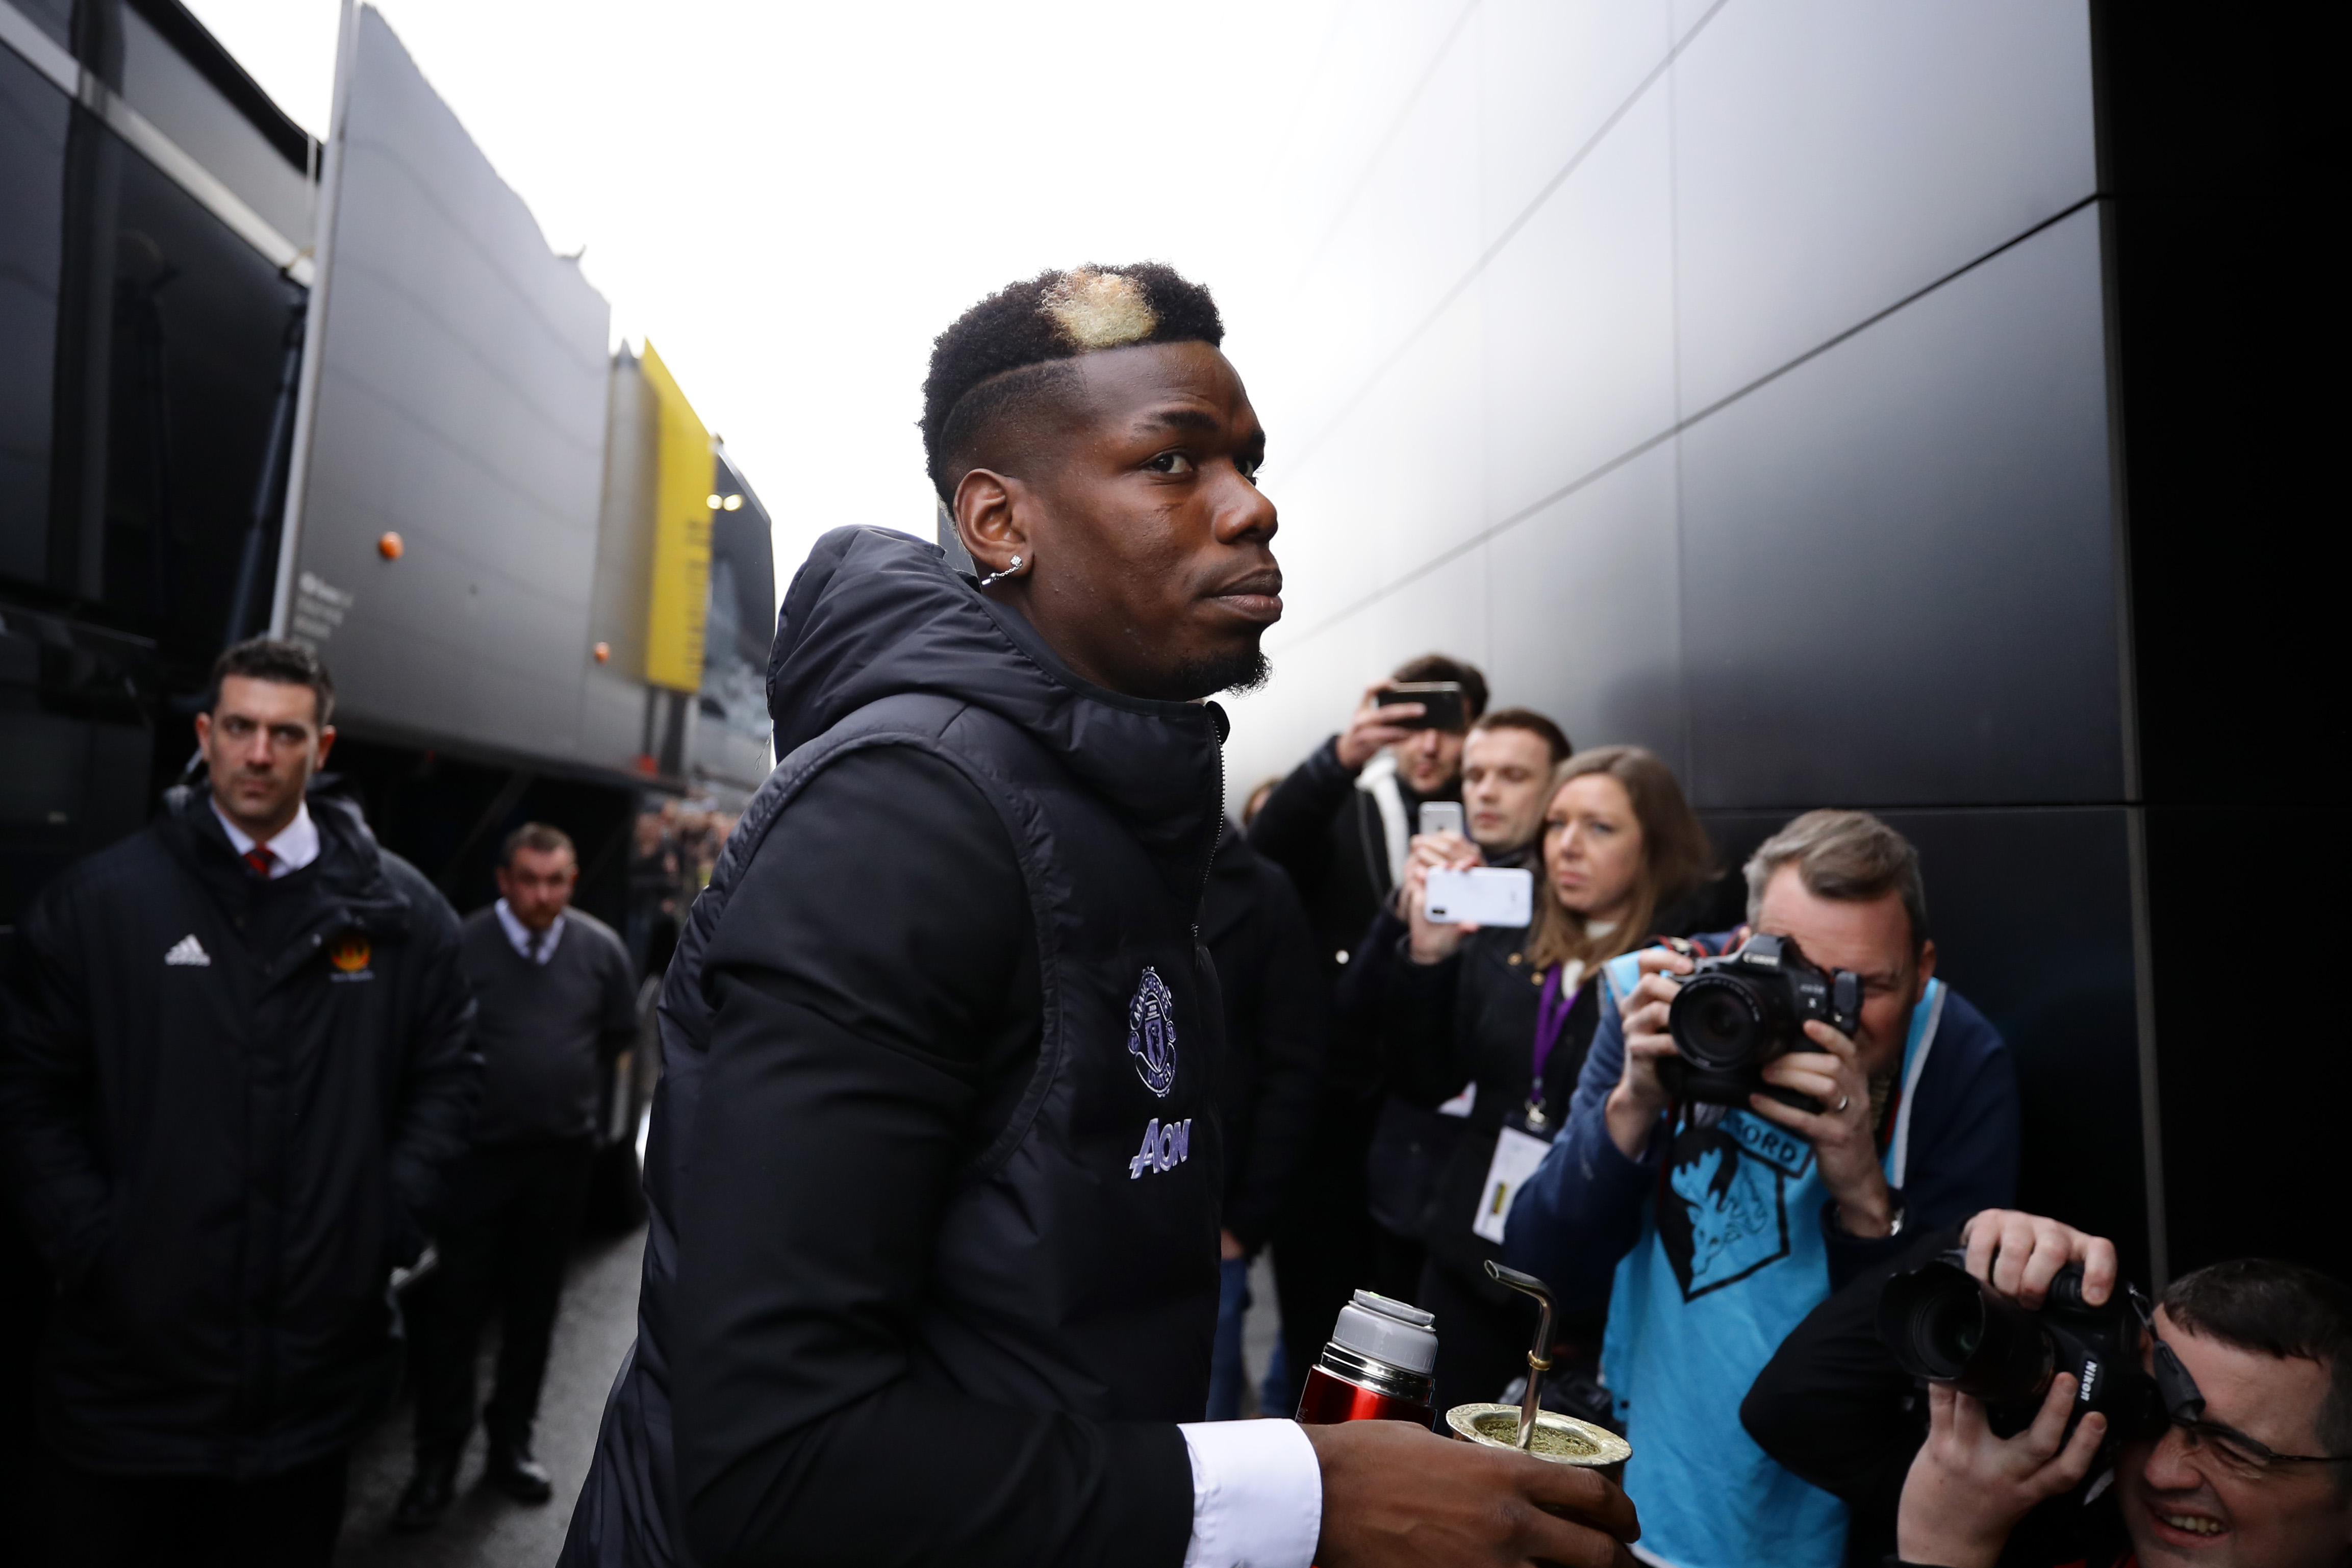 WATFORD, ENGLAND - DECEMBER 22: Paul Pogba of Manchester United arrives at the stadium prior to the Premier League match between Watford FC and Manchester United at Vicarage Road on December 22, 2019 in Watford, United Kingdom. (Photo by Richard Heathcote/Getty Images)